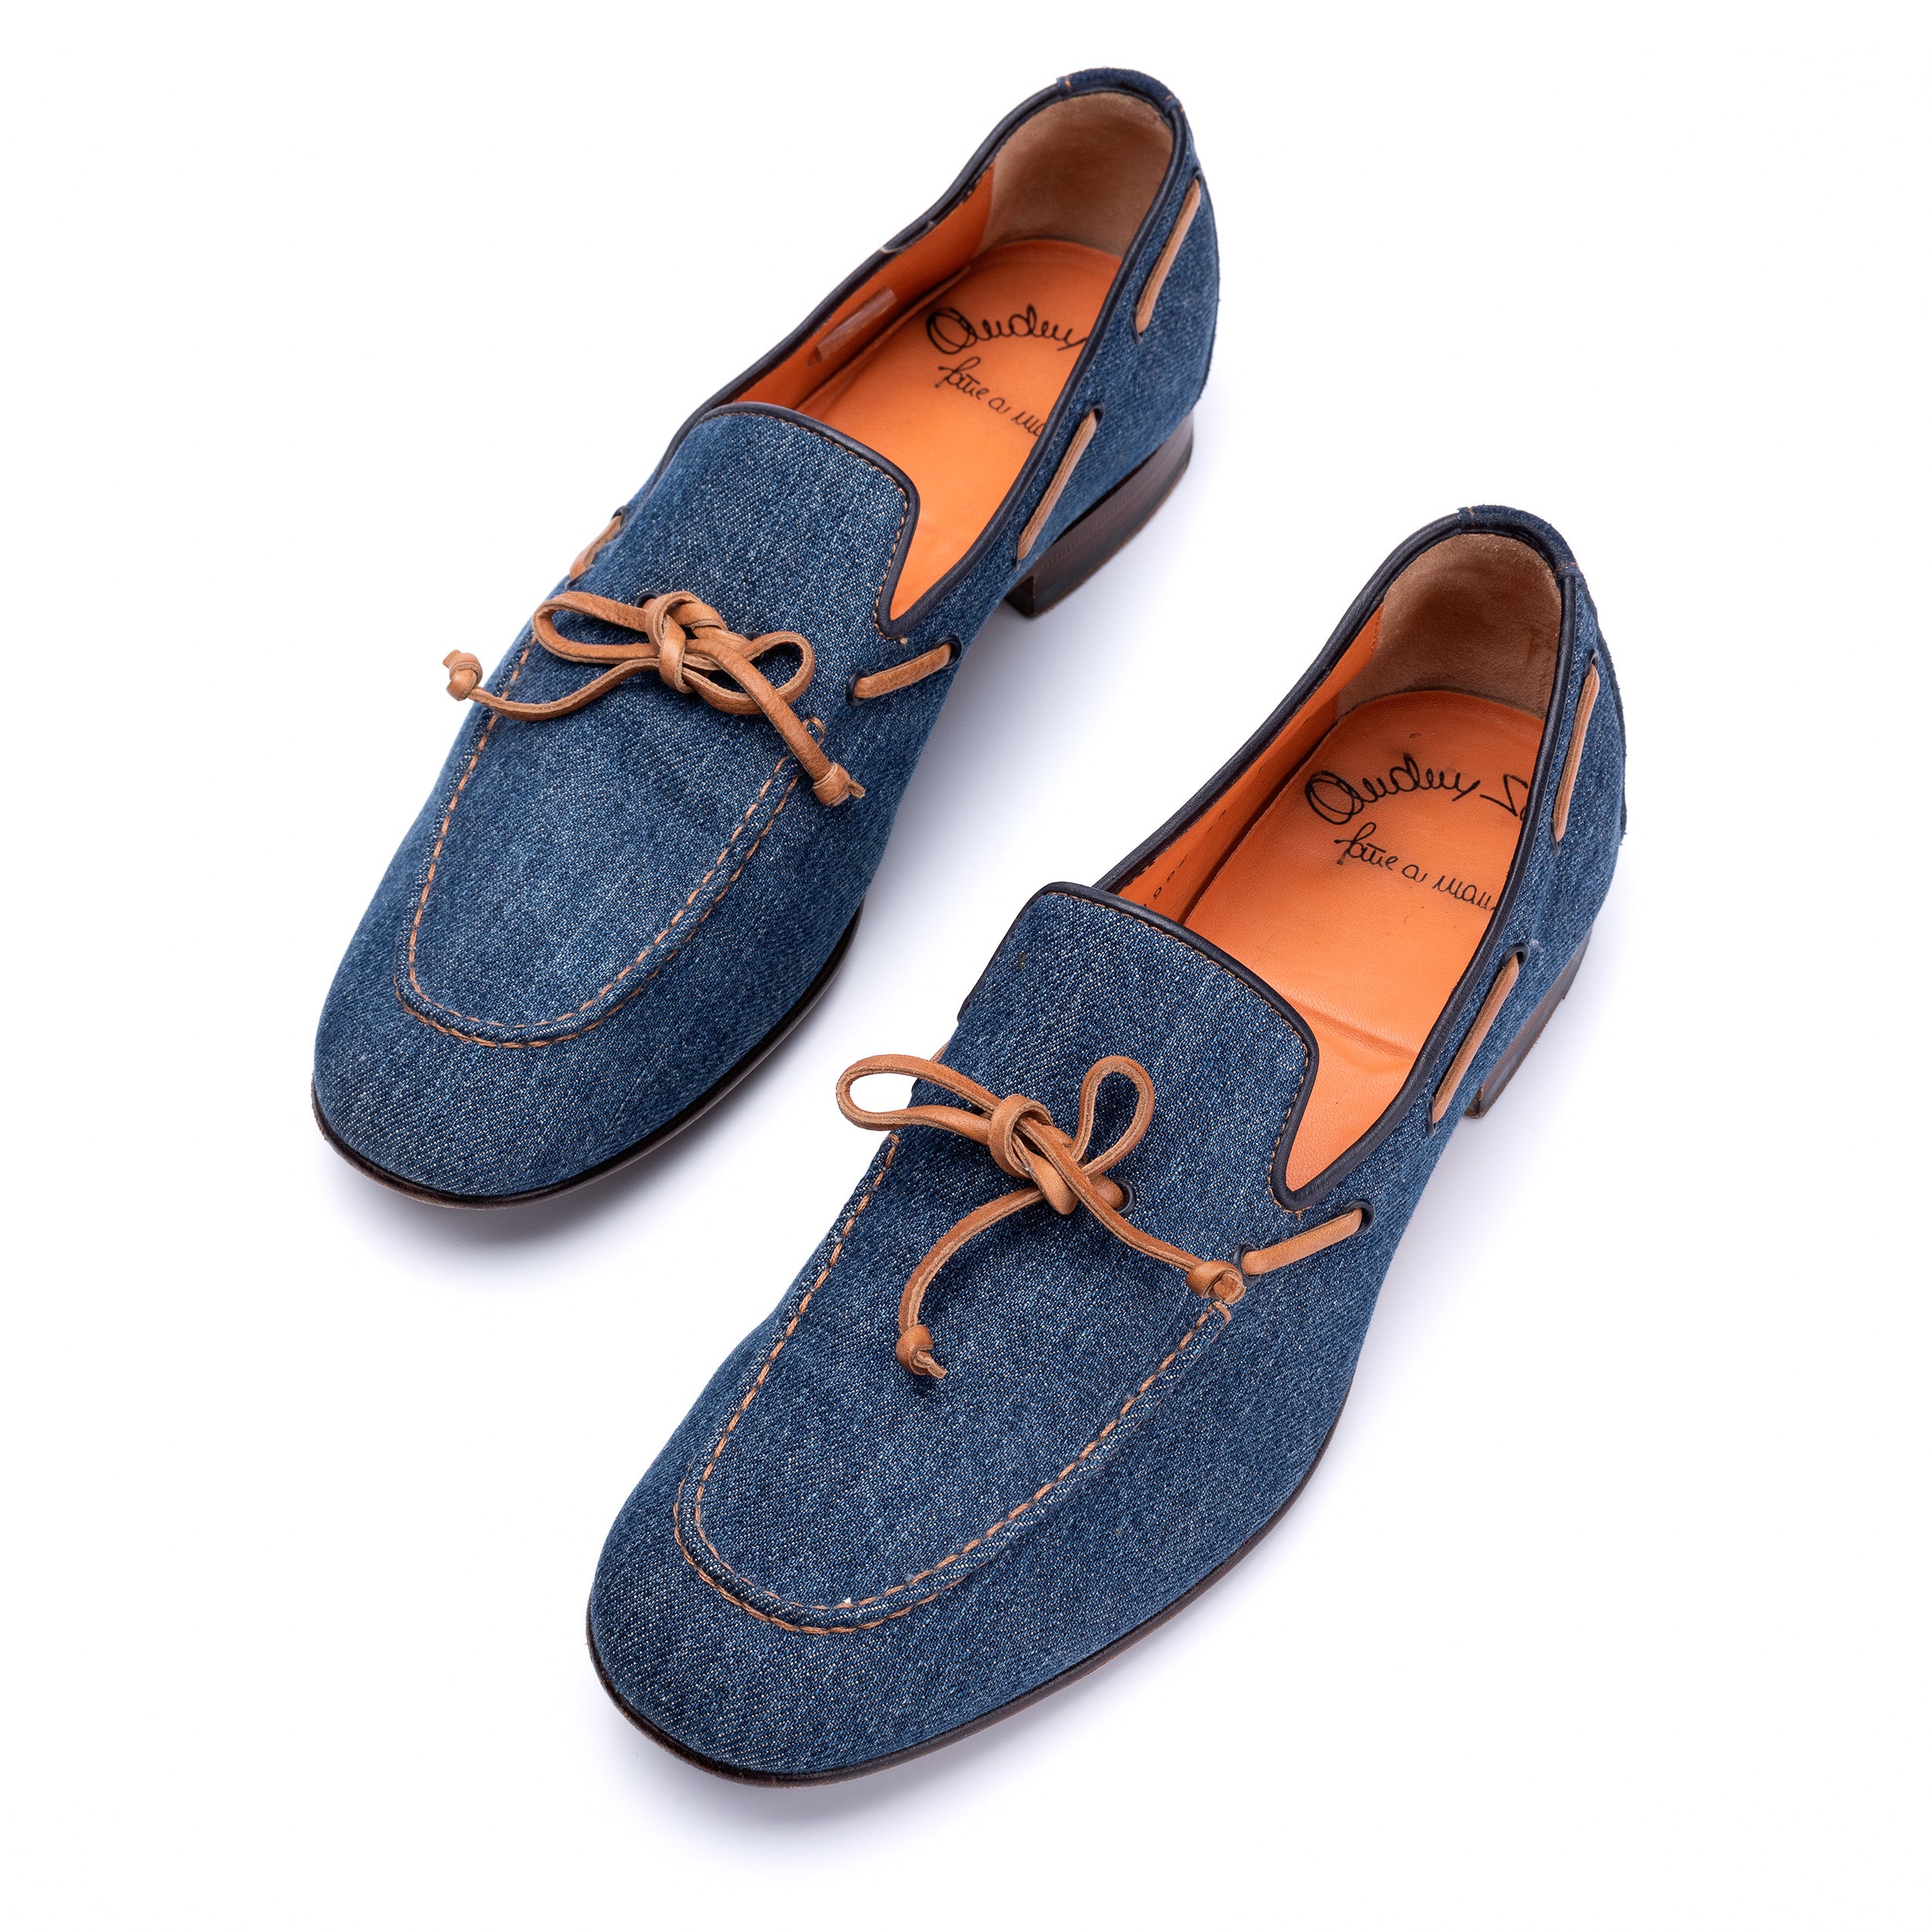 Blue Suede Boat Shoes with Blue Suede Shoes Outfits (19 ideas & outfits)